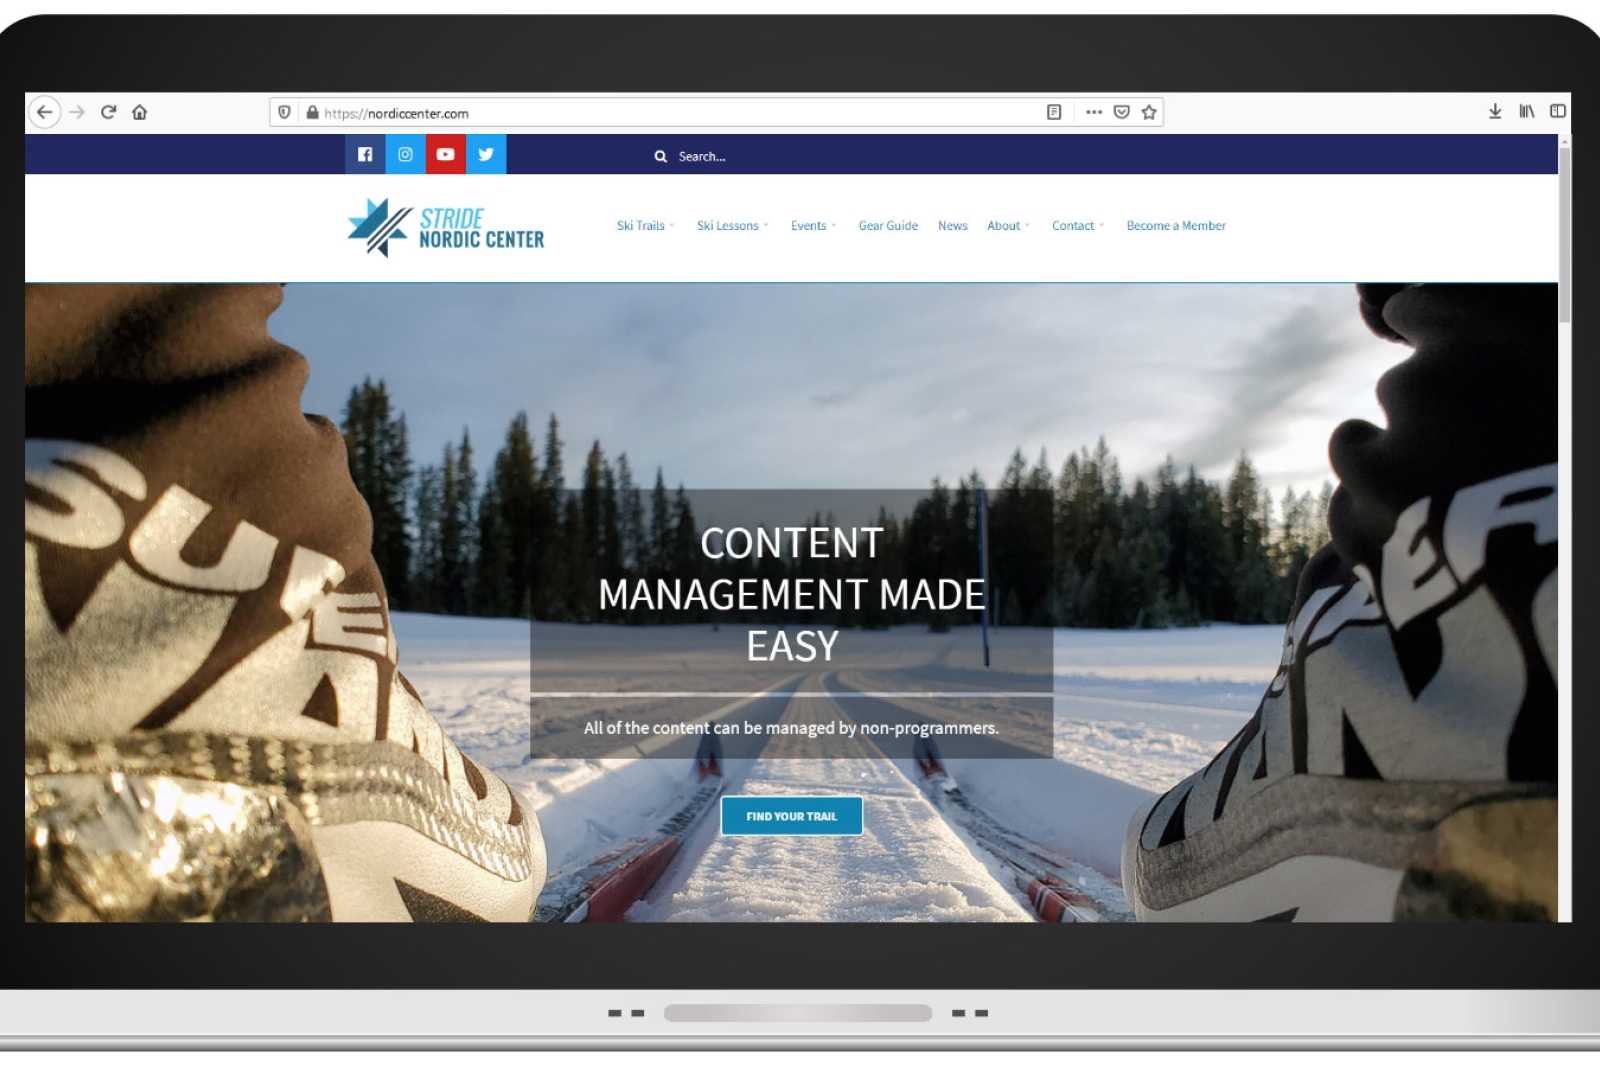 Nordic Center is a full customizable website theme that meets every business need of a Nordic Center or a cross-country ski area.